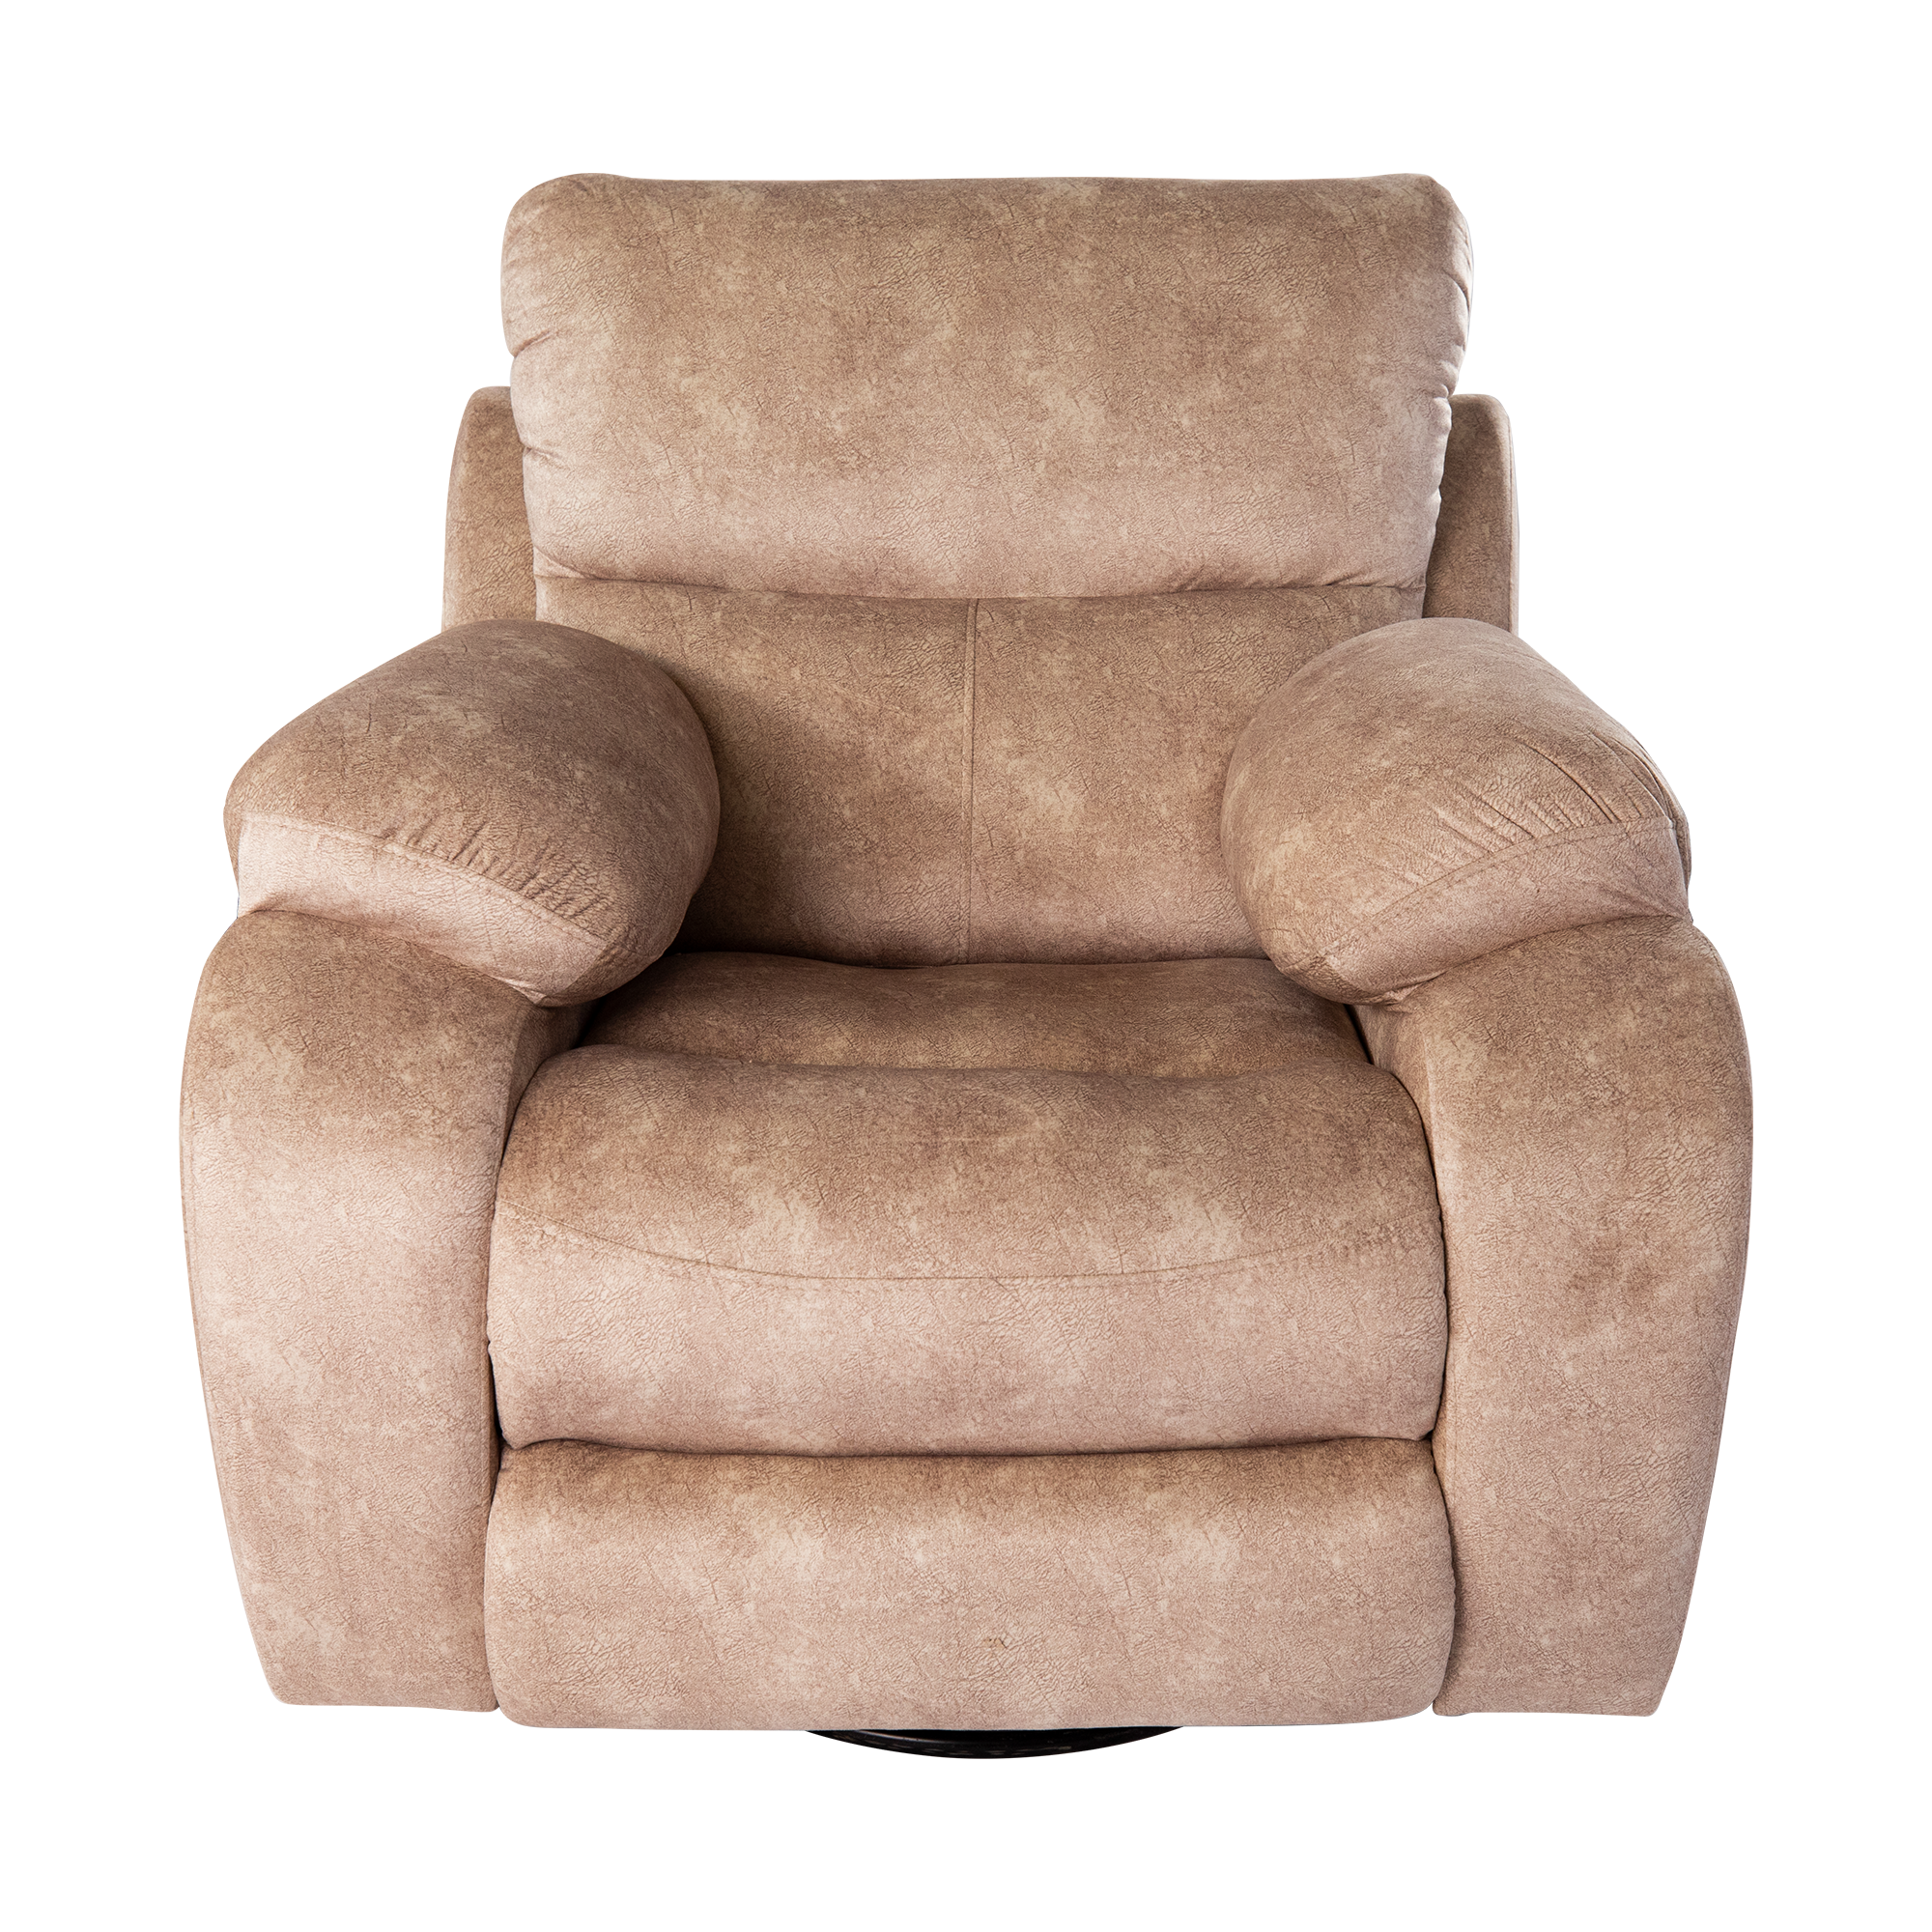 Lazy boy comfort Recliner Chair from Aldora furniture